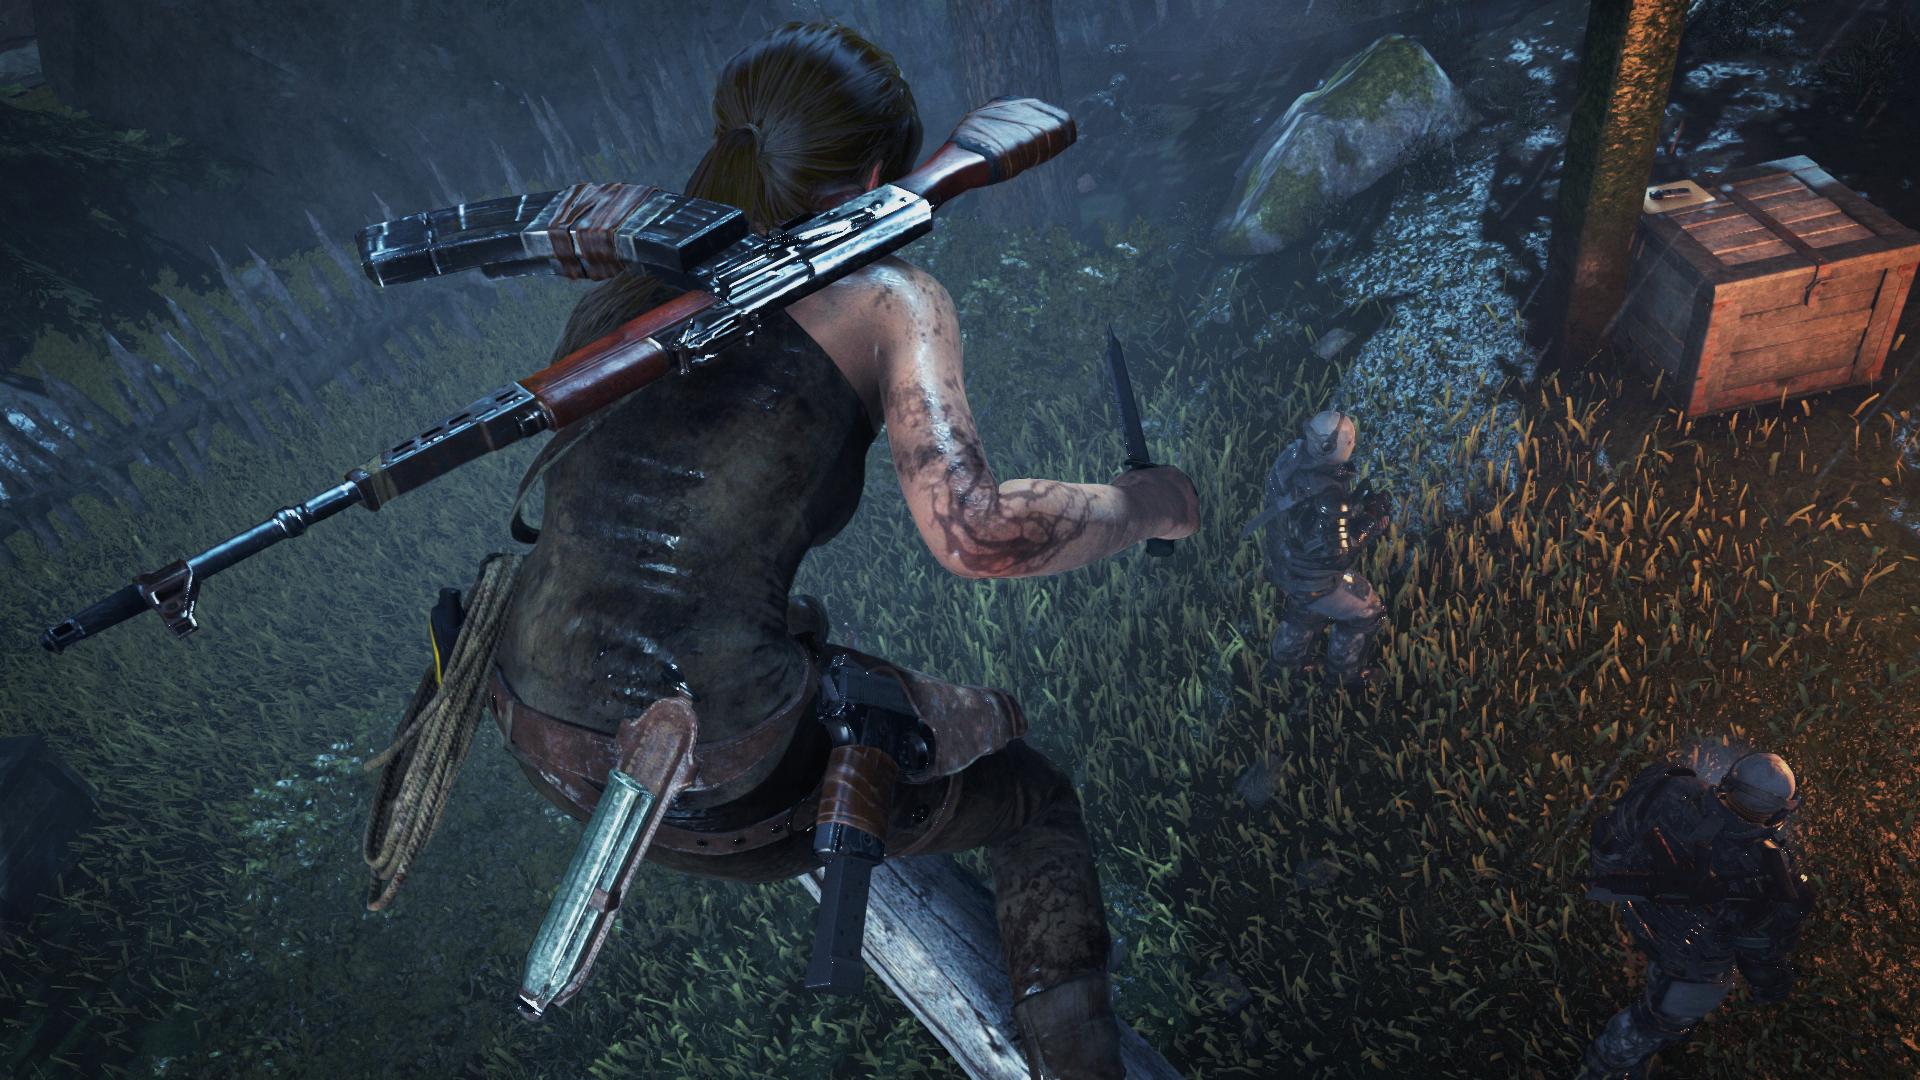 Rise of the Tomb Raider: How to Bring Down the Statue with Greek Fire 